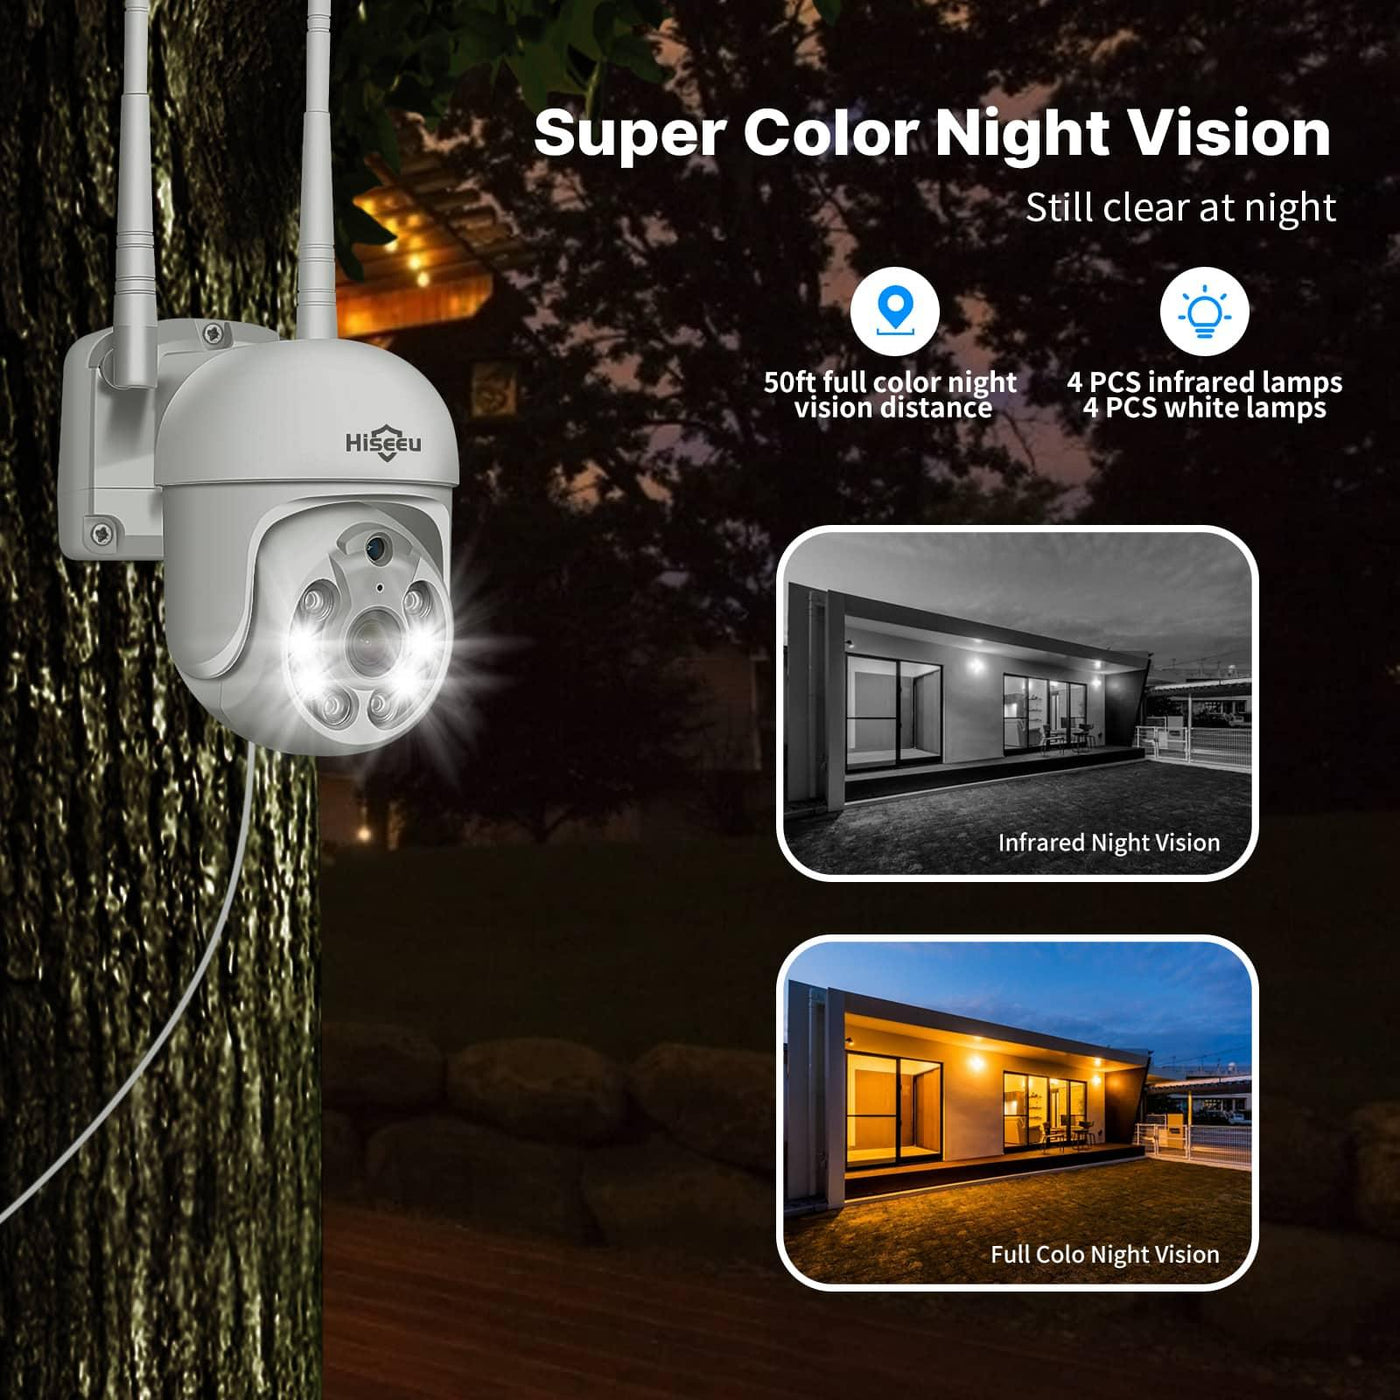 Hiseeu Pan/Tilt/Zoom Security Camera 3MP 5MP Outdoor Wireless Surveillance Camera Floodlights Full Color Night Vision Two Way Audio IP66 Waterproof Motion Detection Compatible with Alexa